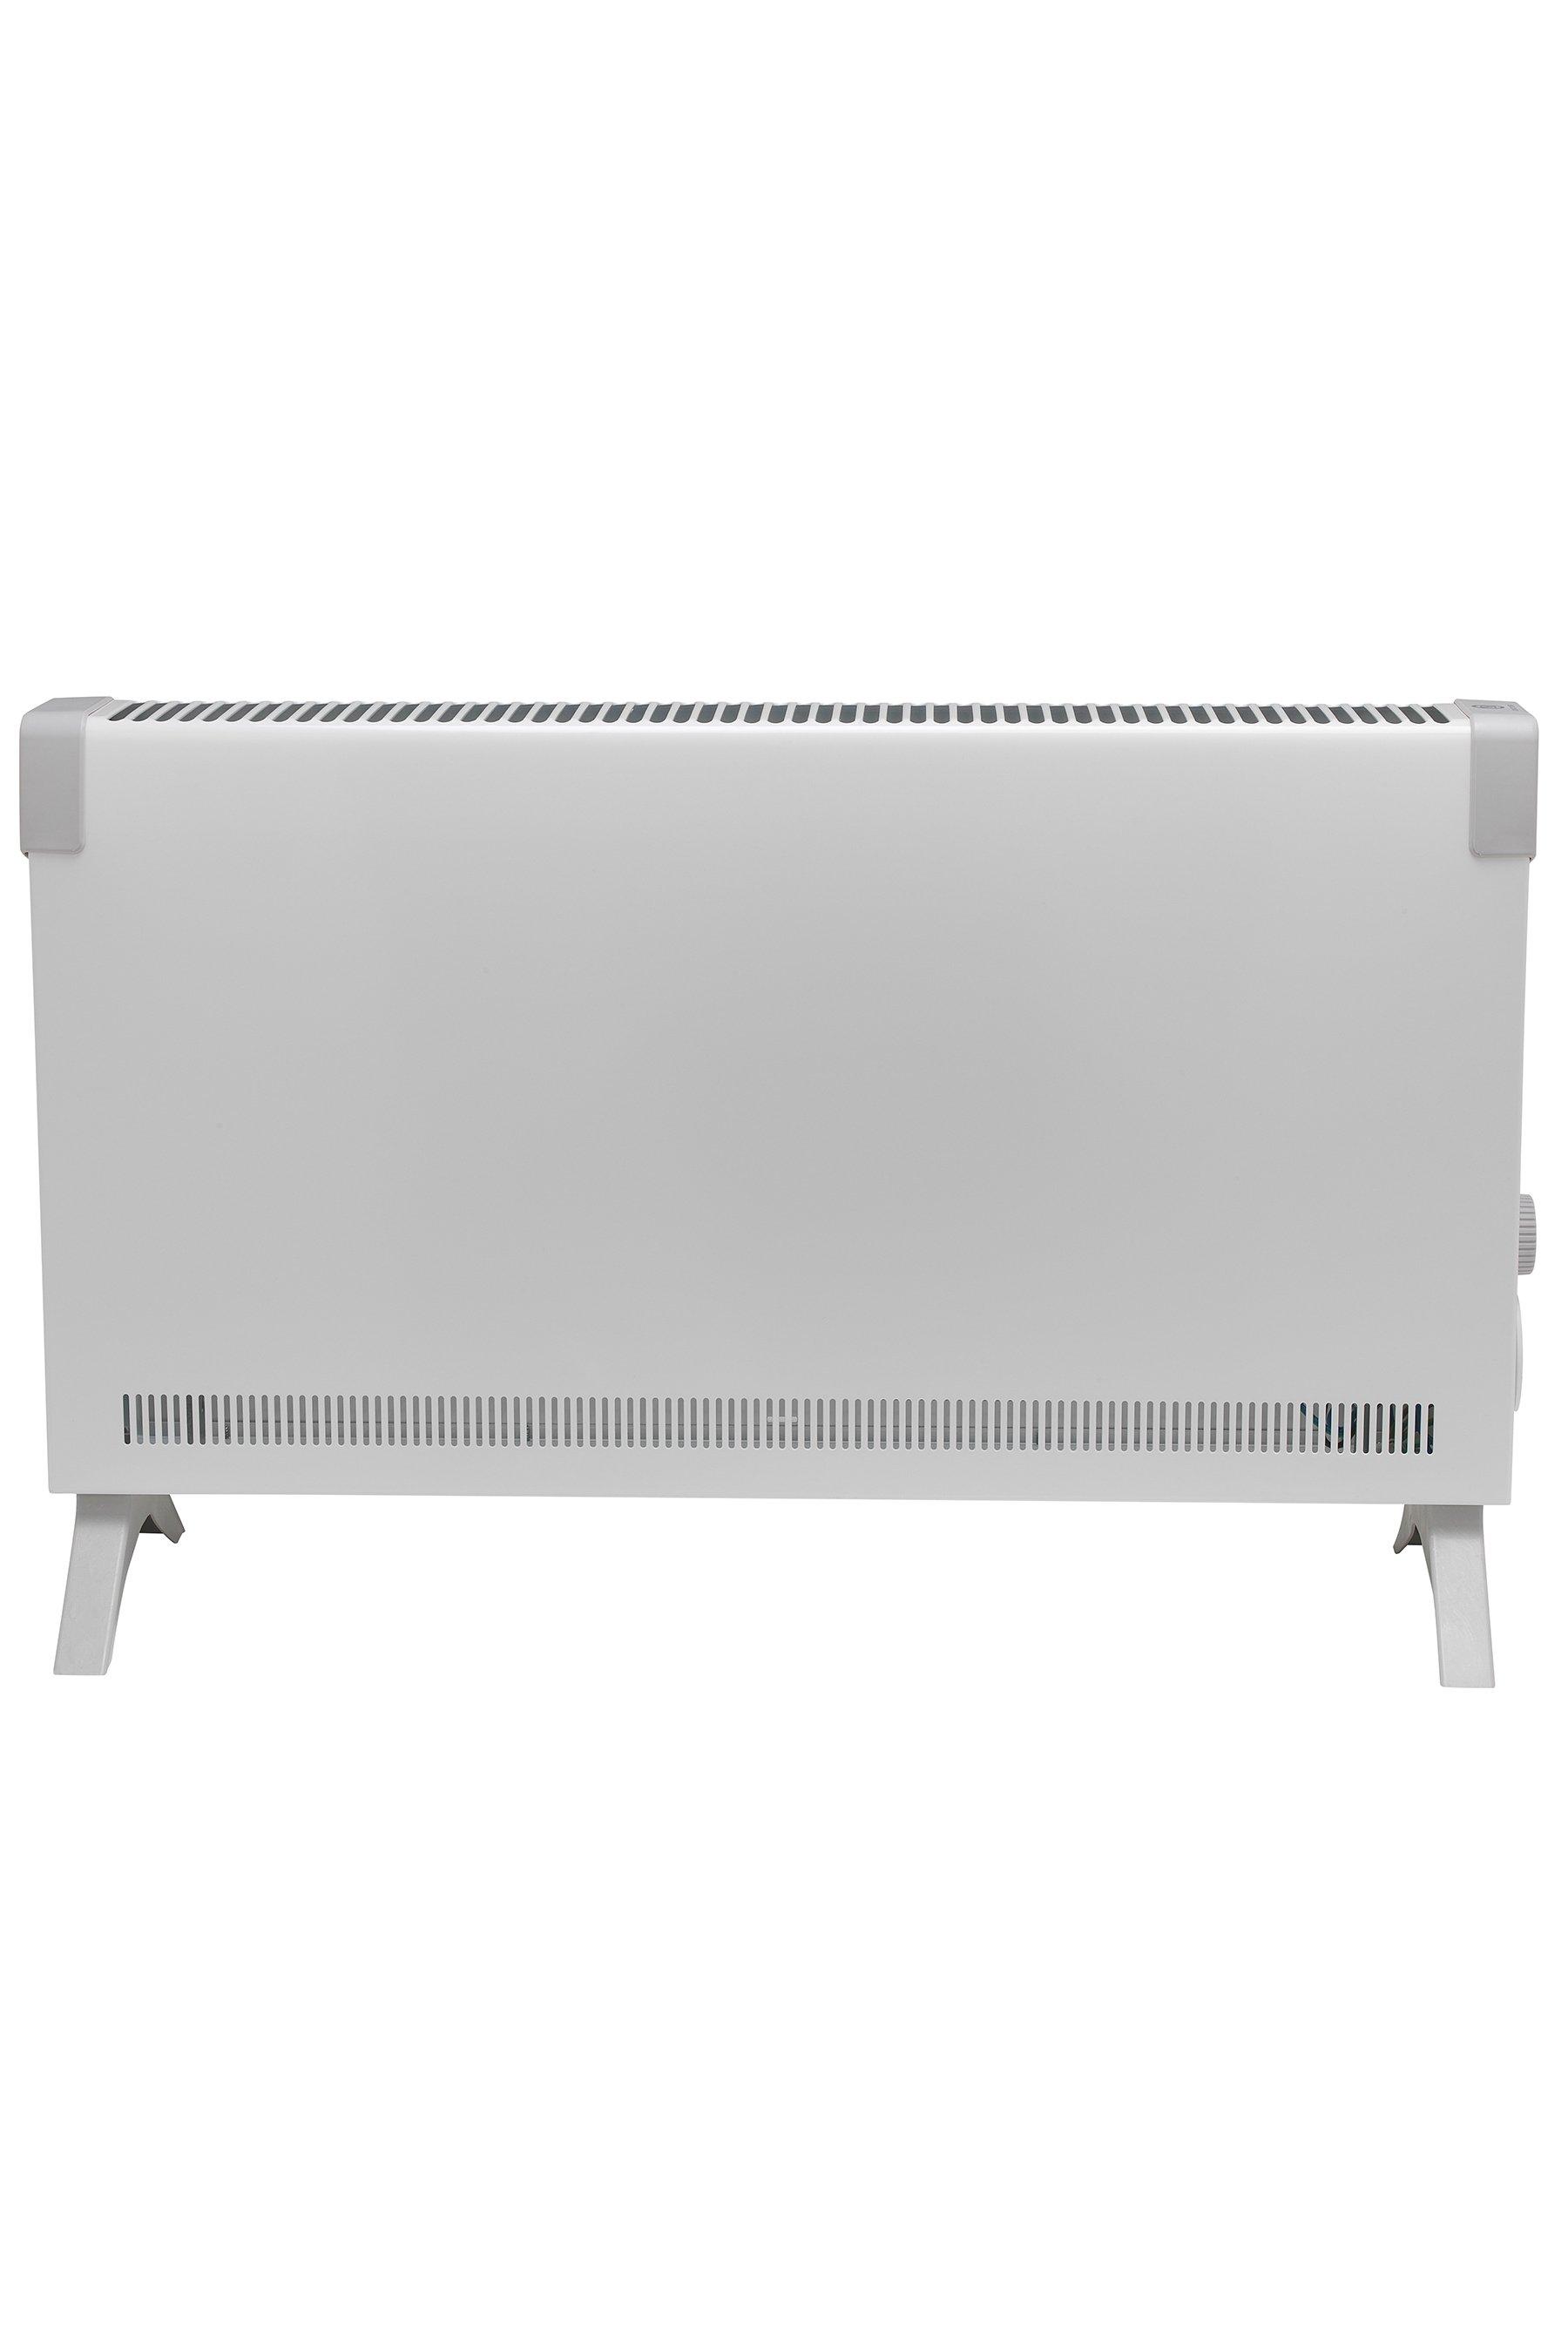 Vader wakker worden Clancy Dimplex 3000W Convector Heater with Thermostat and Timer | Studio